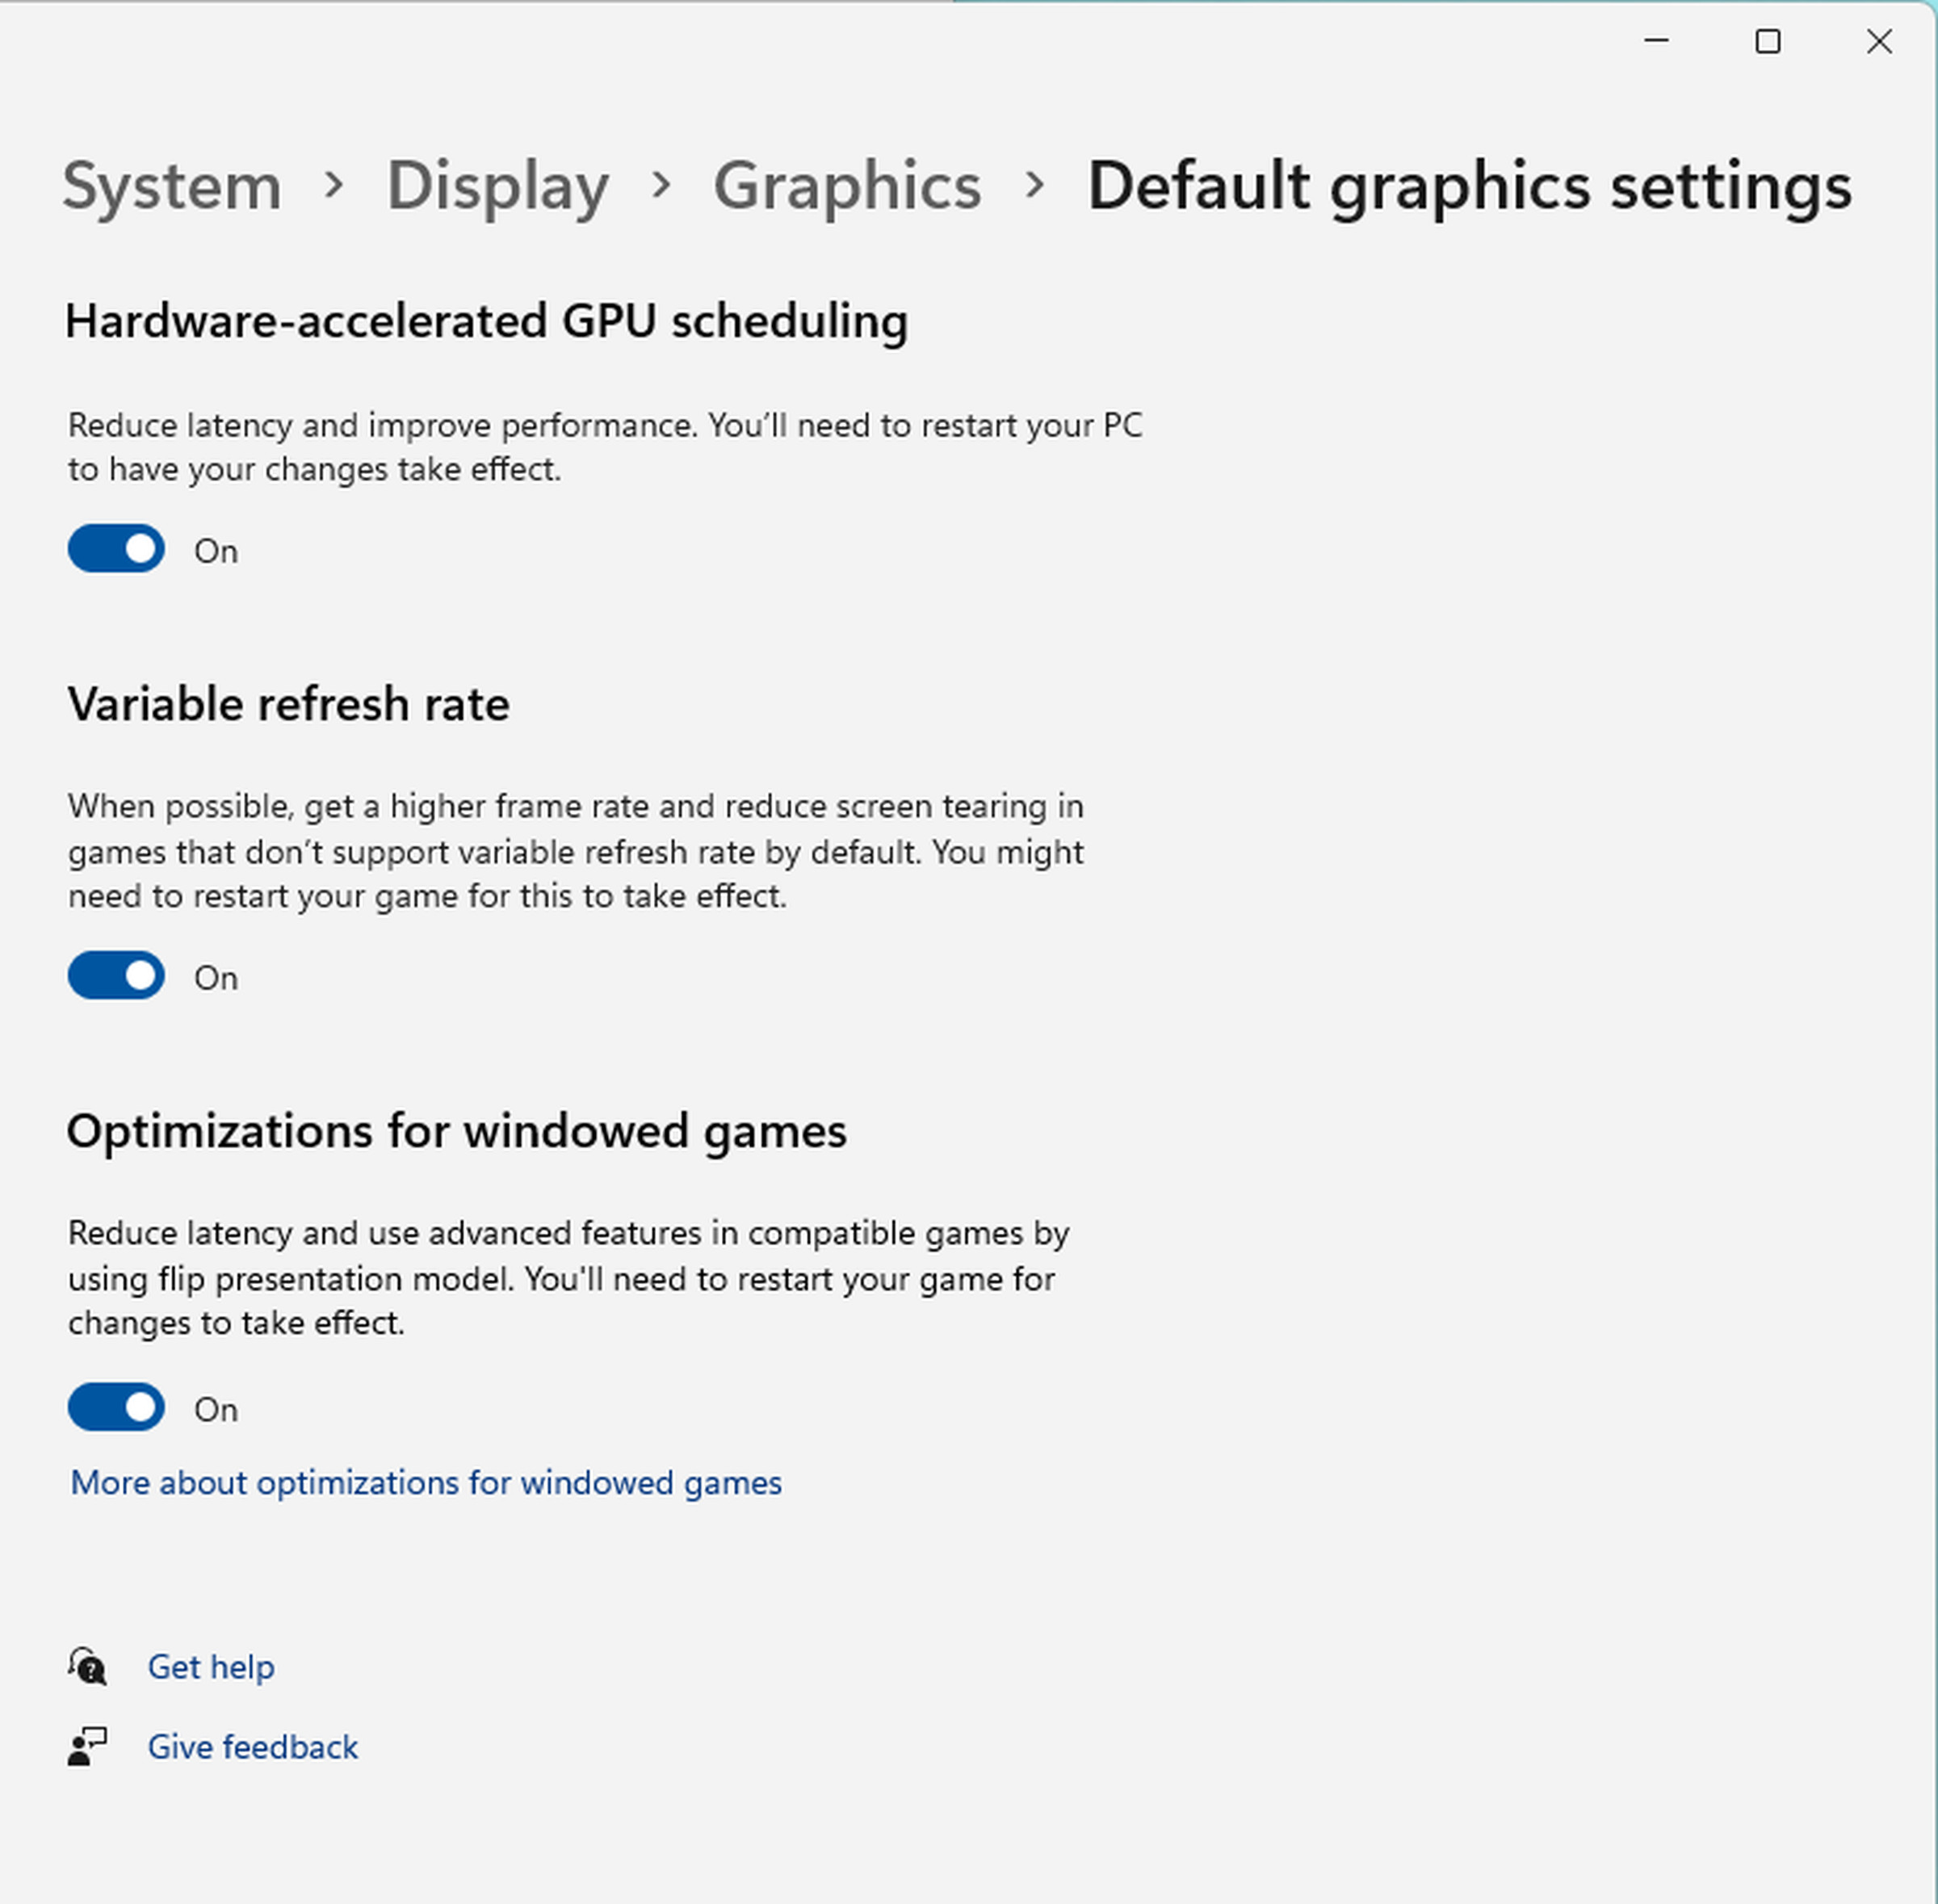 New optimizations for windowed games feature in Windows 11.